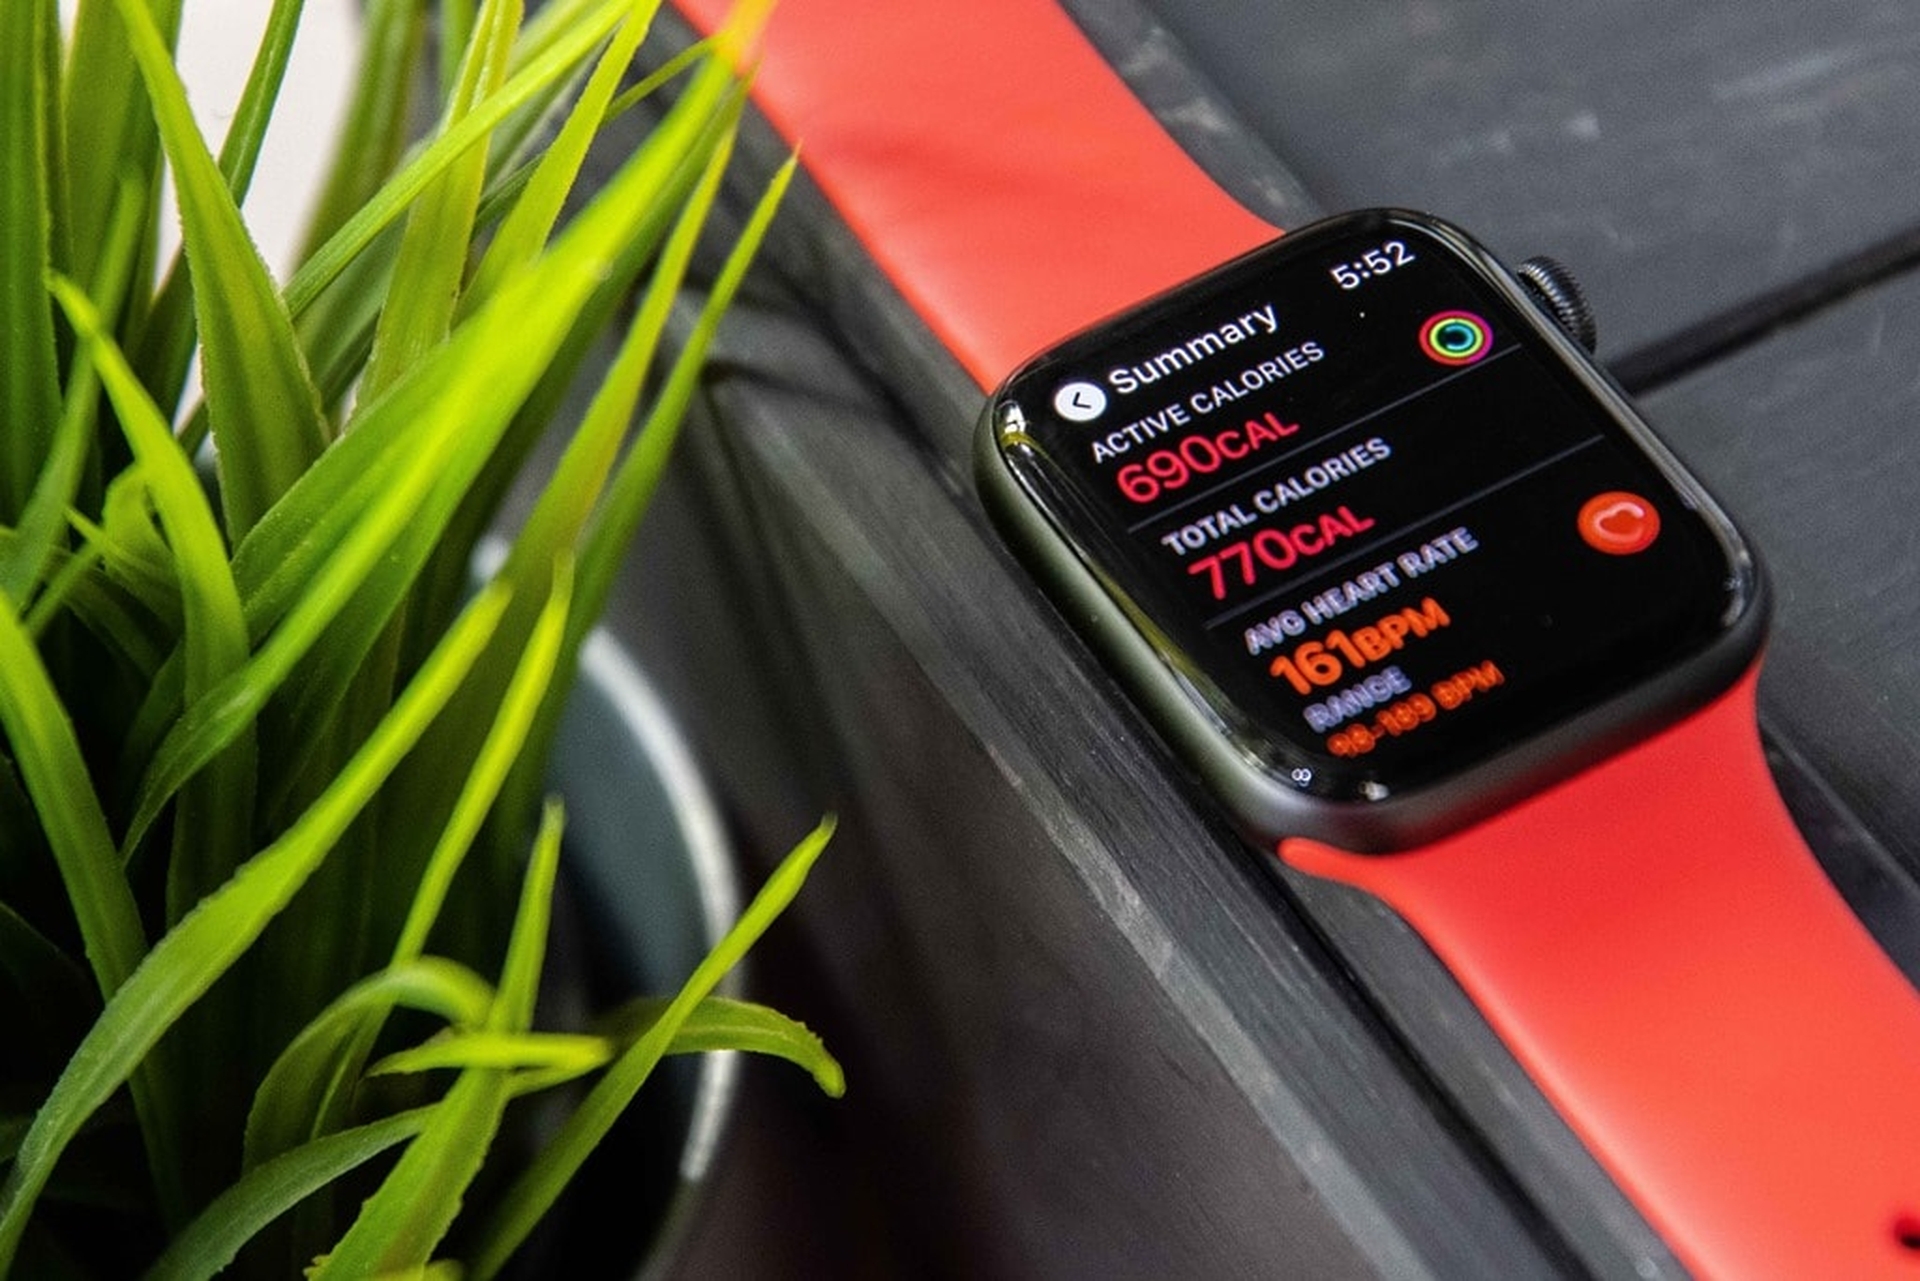 In this article, we are going to go over our Apple Watch comparison chart, giving you our opinion on how they compare, and which one is worth the price tag.